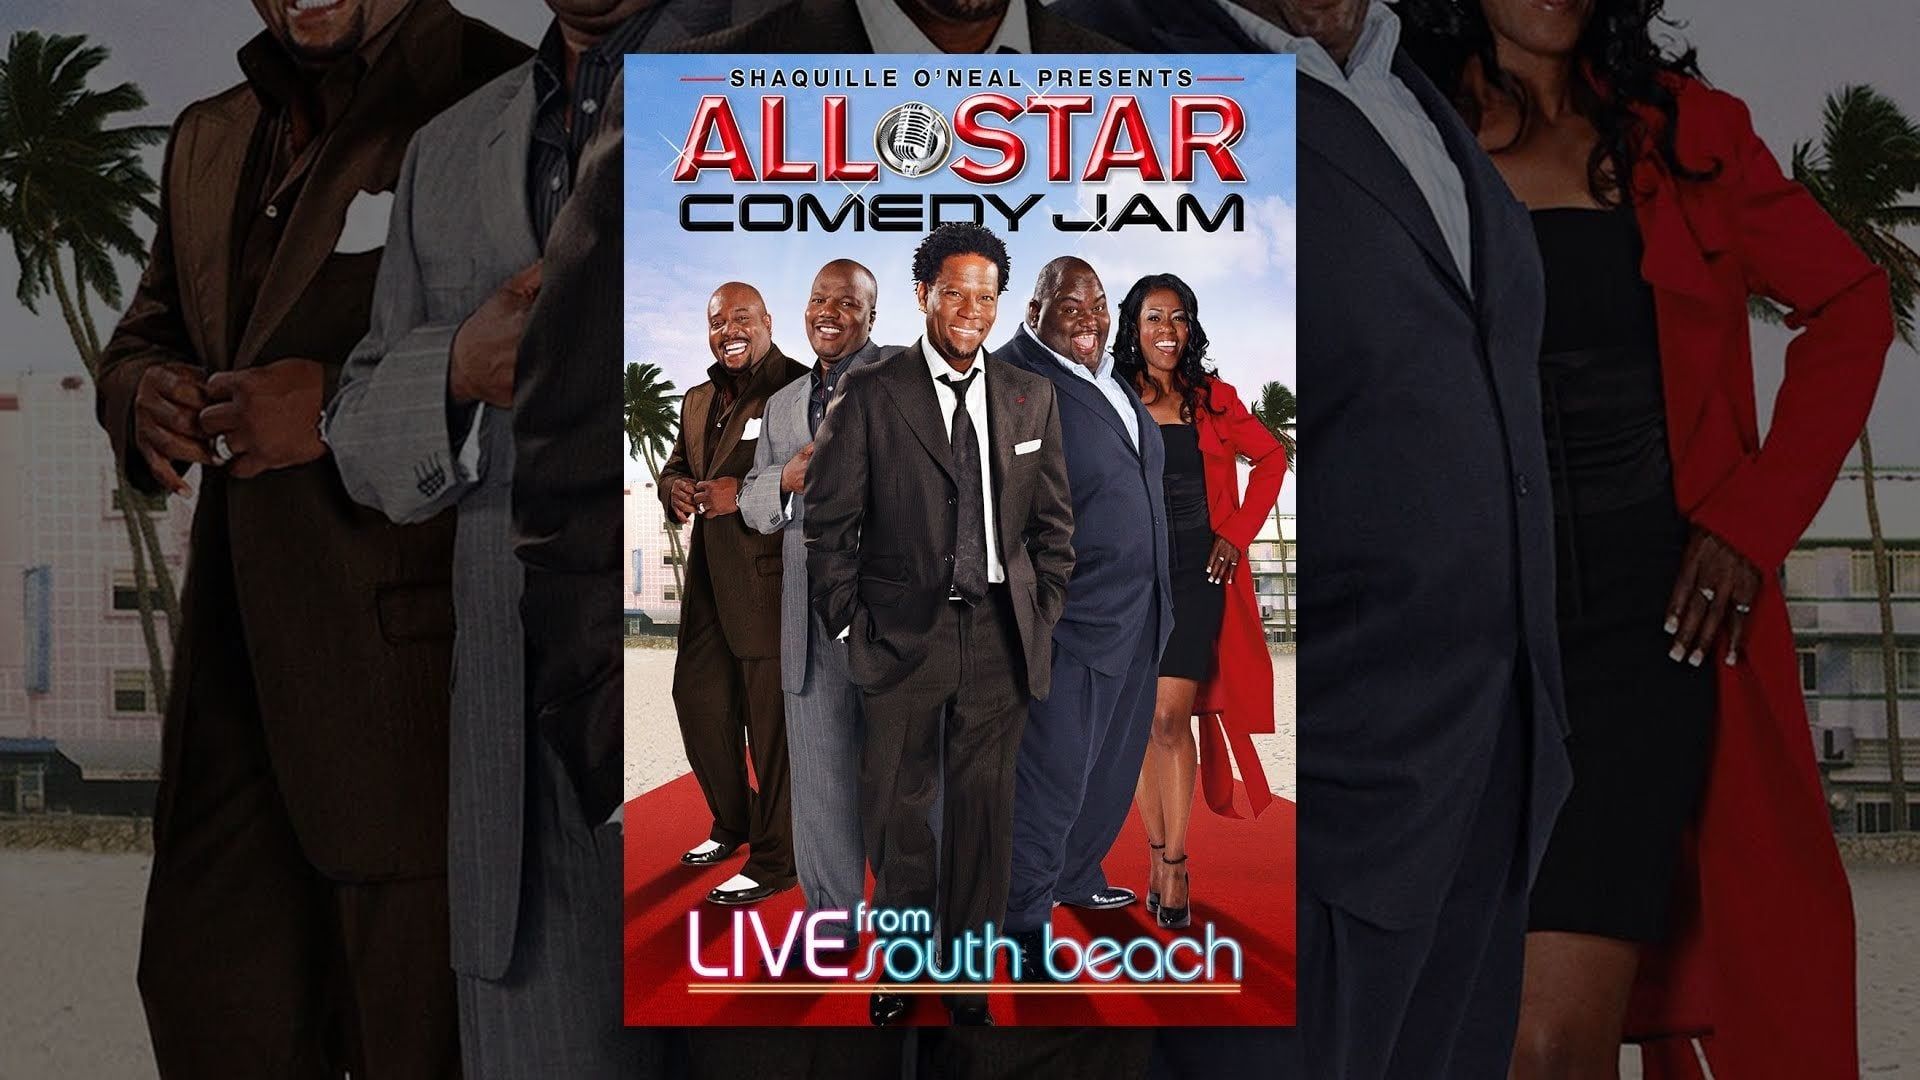 All Star Comedy Jam: Live from South Beach background